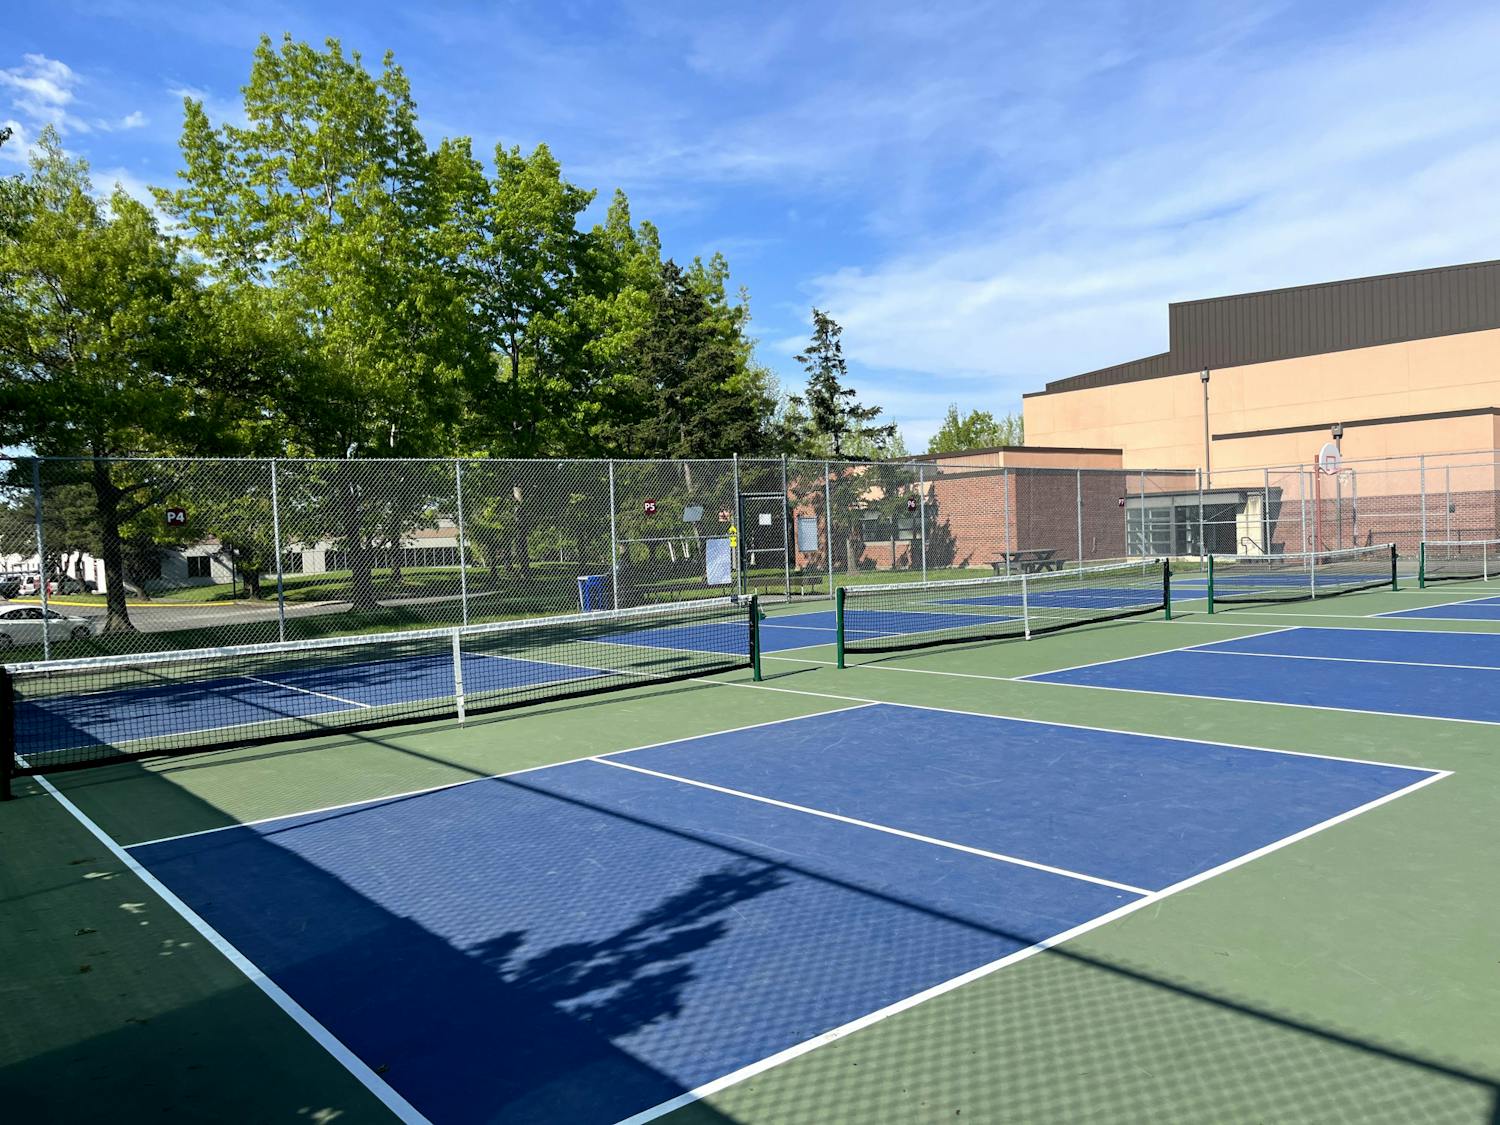 (1) First annual Orca Pickleball Spring Classic Tournament hopes to bring Bellingham community together